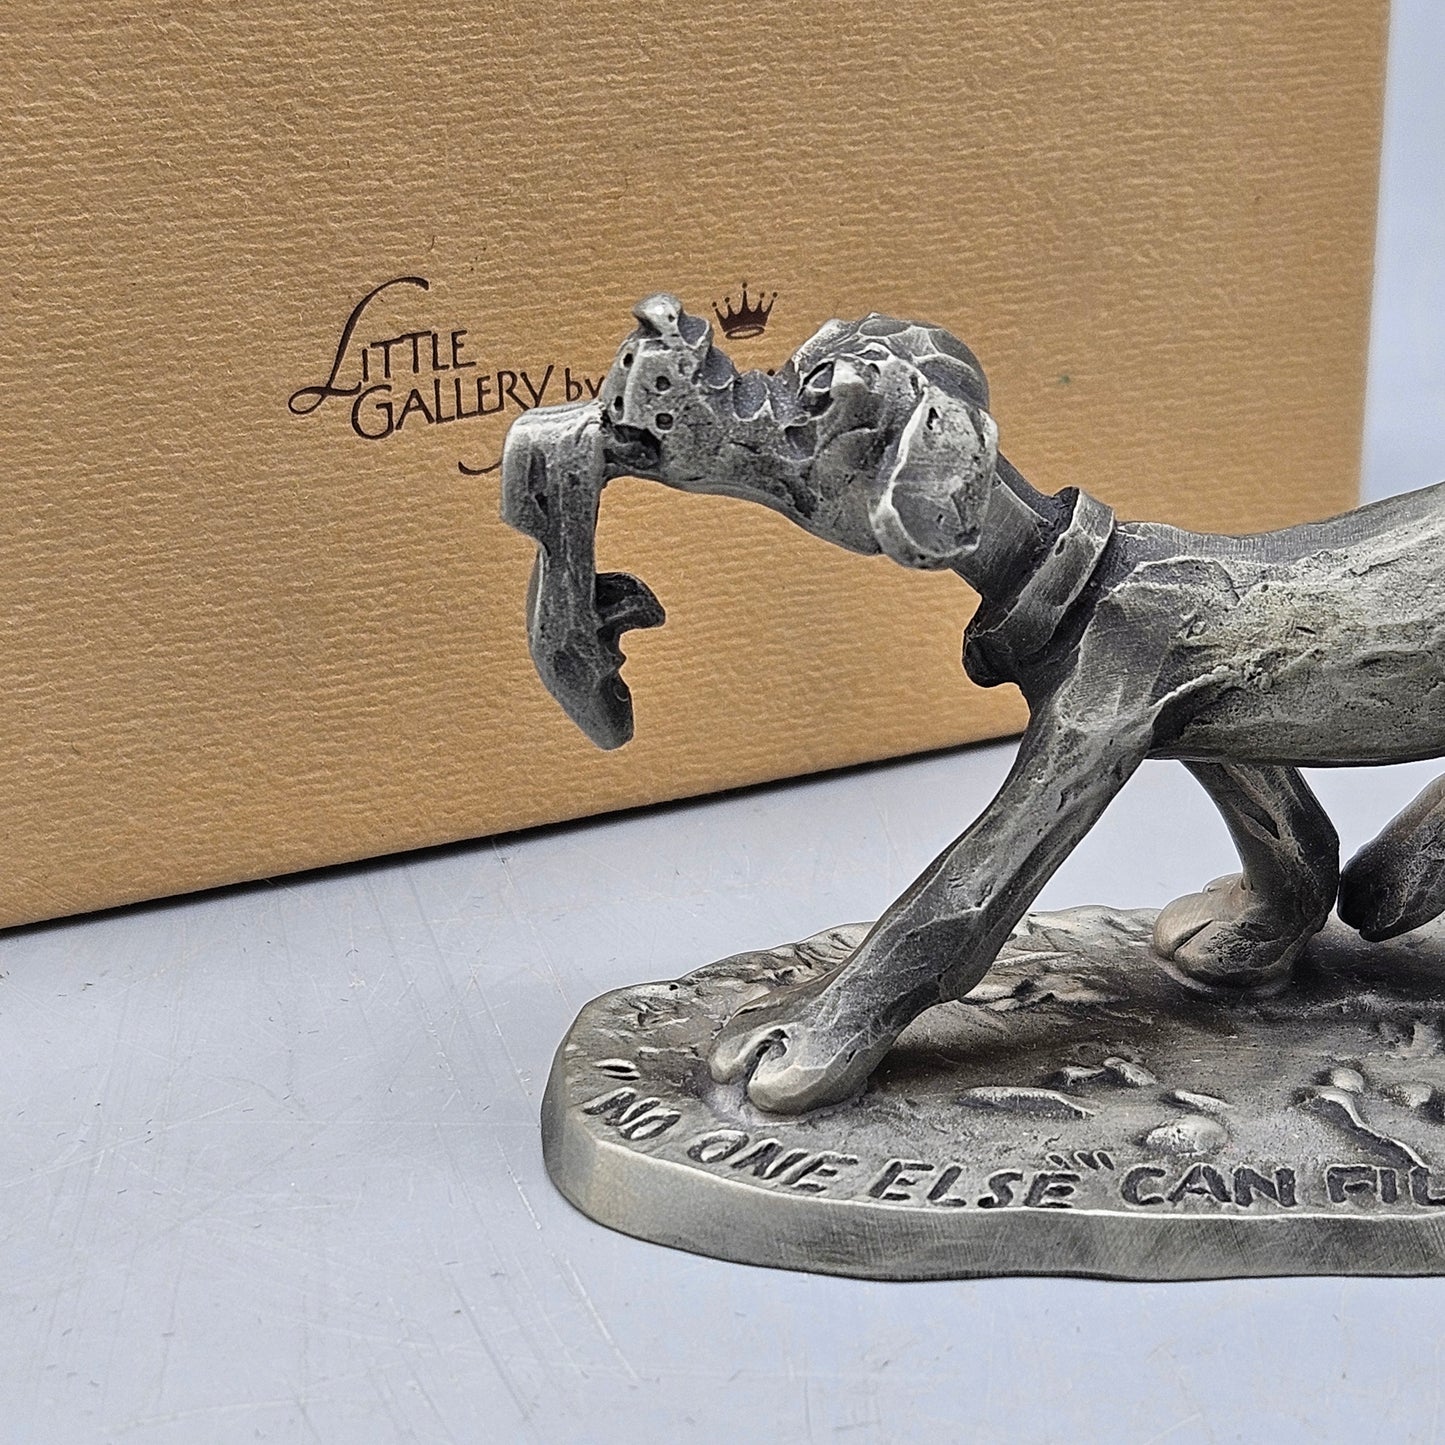 1975 Vintage Hallmark Pewter Dog Figurine with Shoe in Mouth